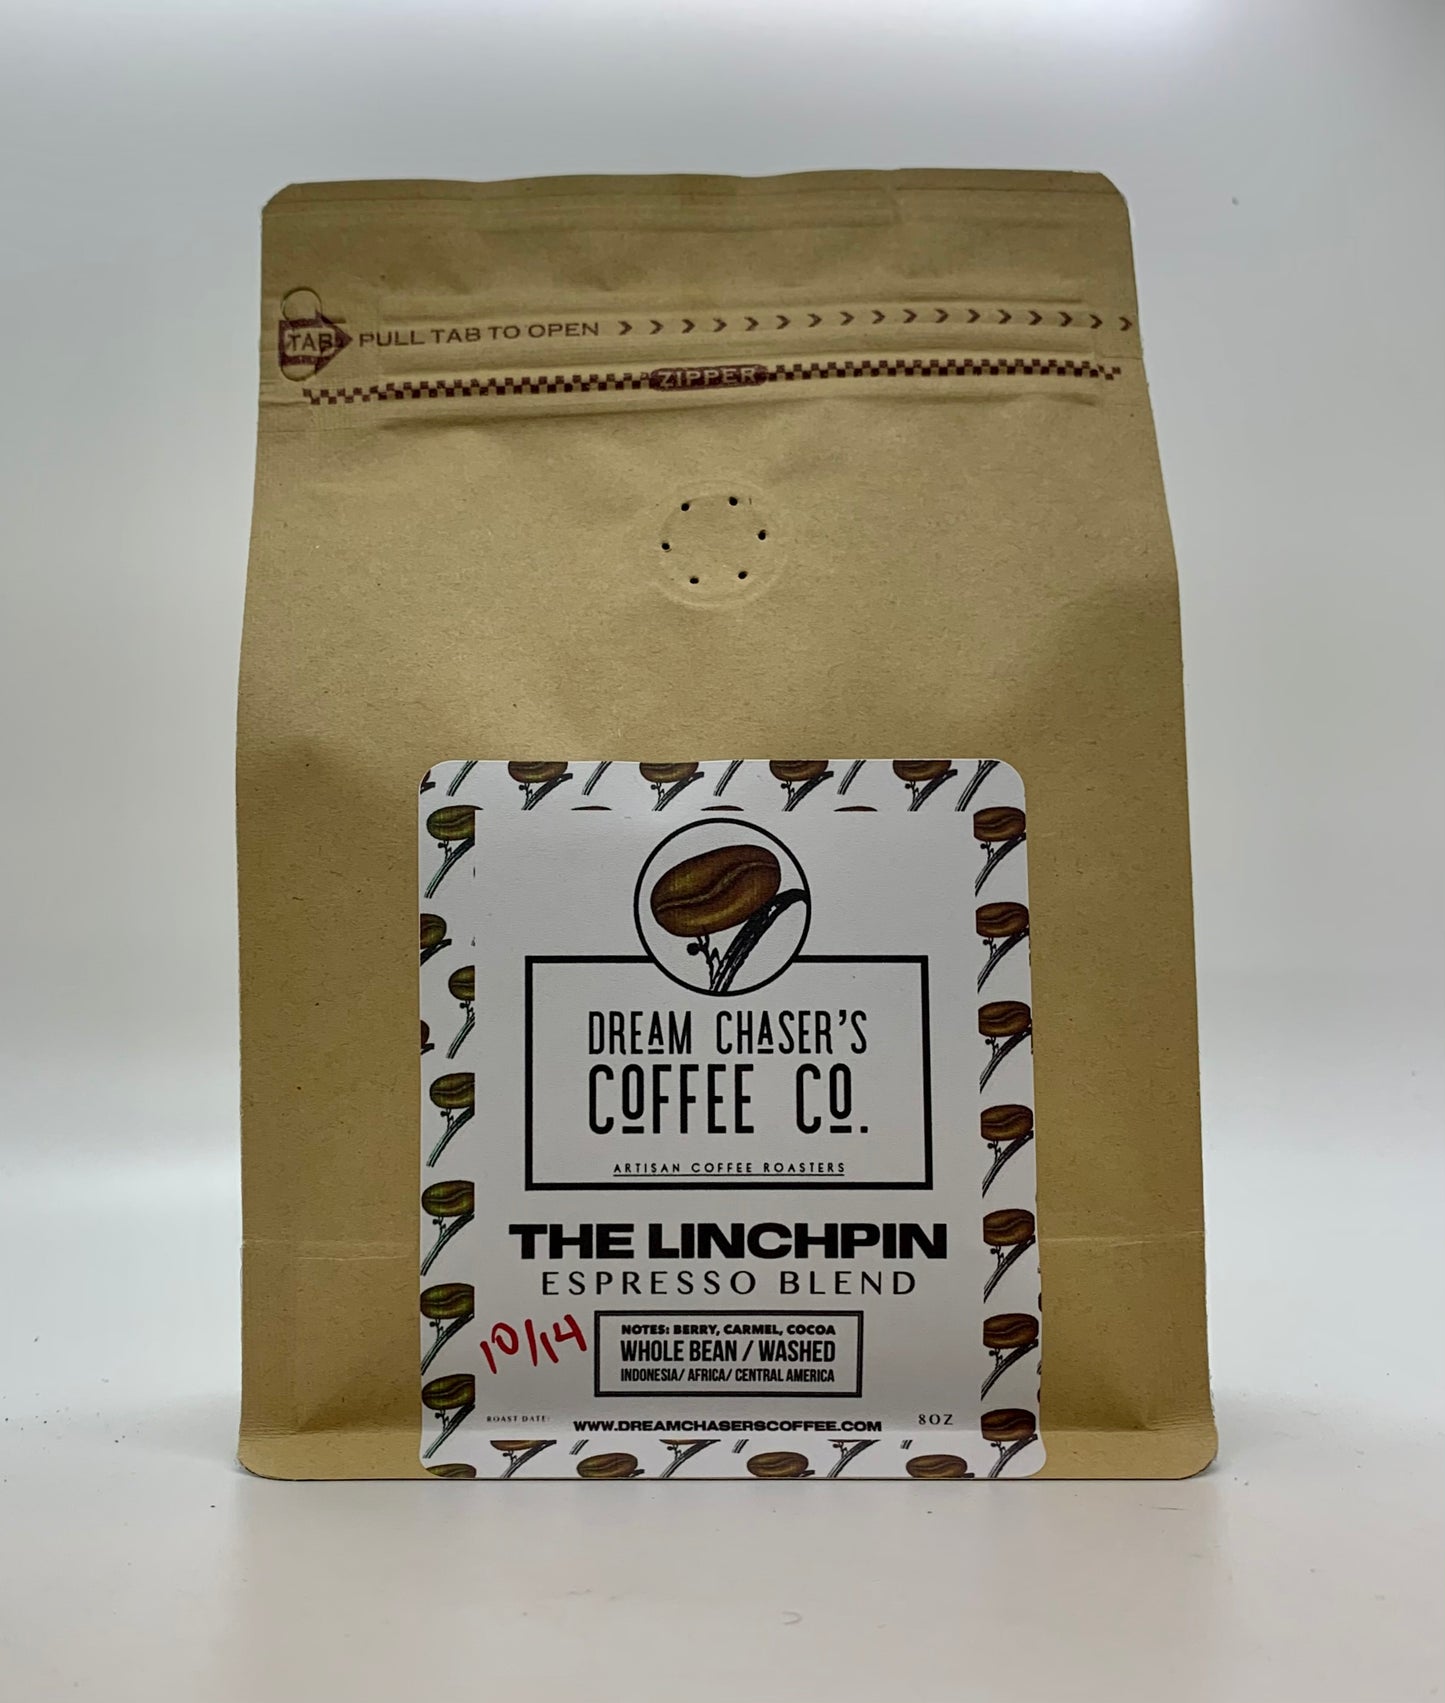 THE LINCHPIN - Our Special Espresso Blend